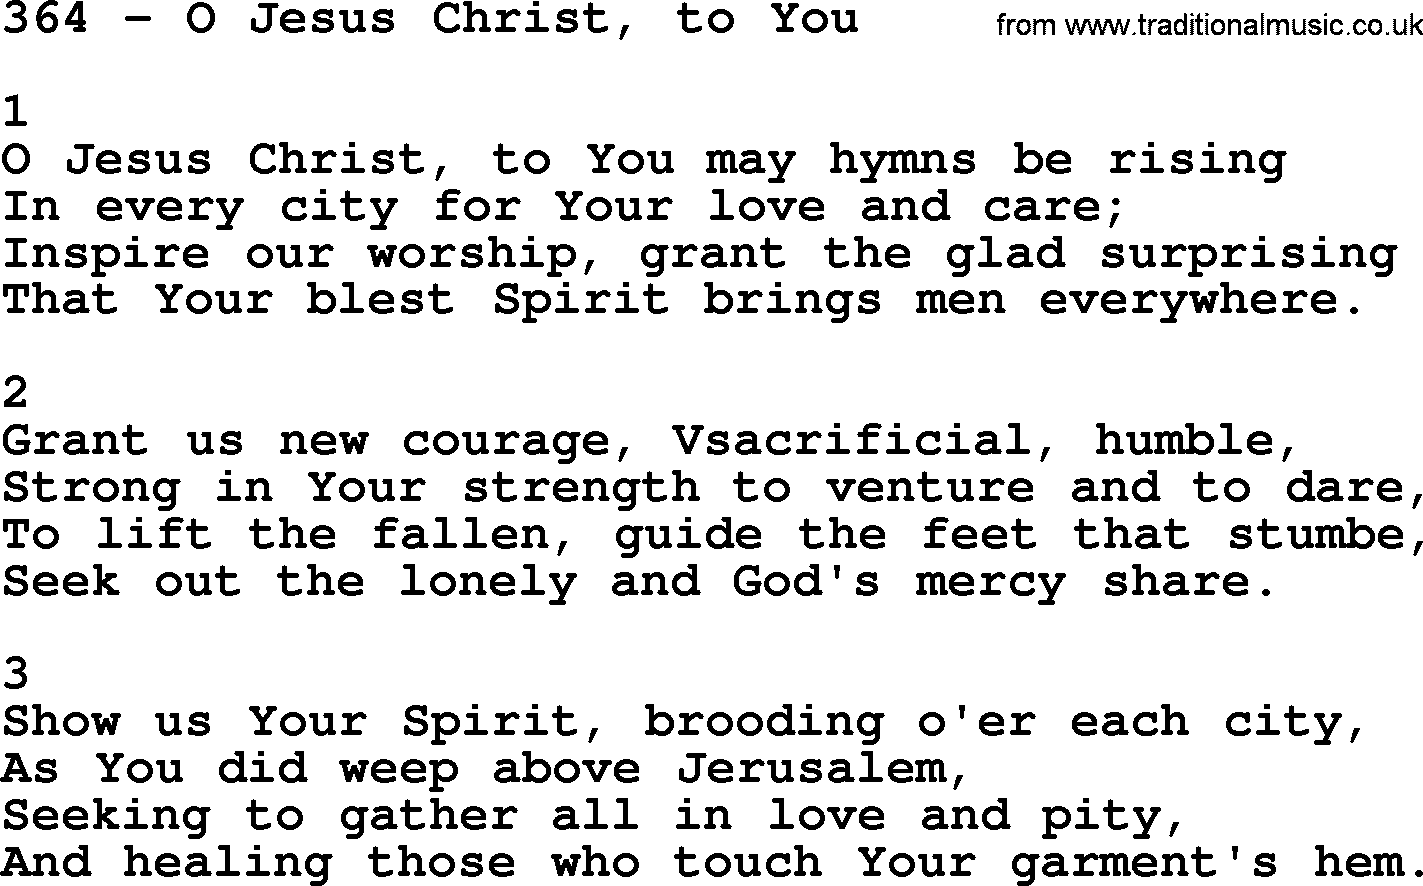 Complete Adventis Hymnal, title: 364-O Jesus Christ, To You, with lyrics, midi, mp3, powerpoints(PPT) and PDF,